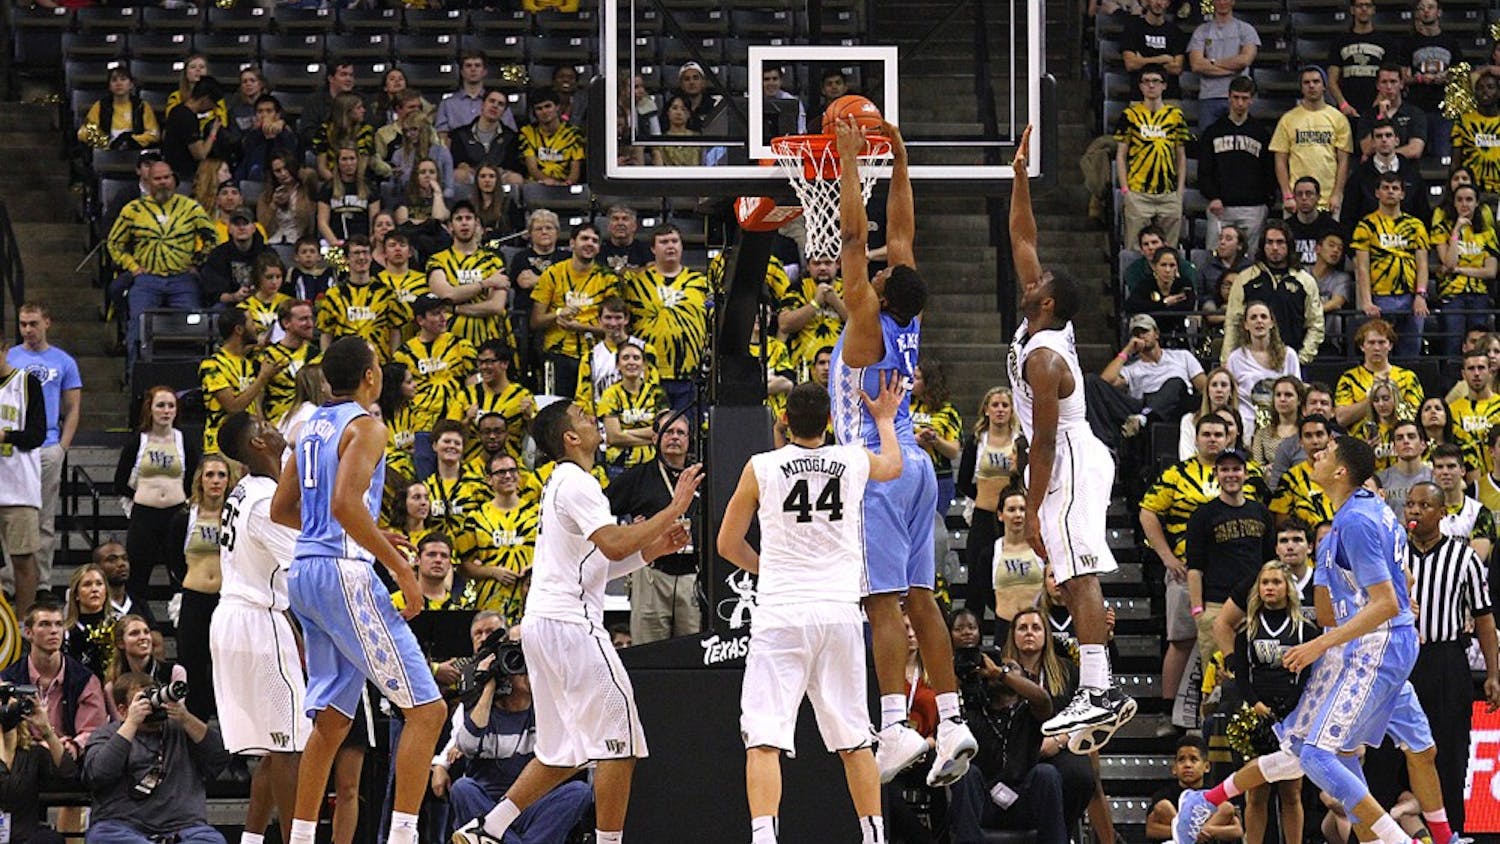 Sophomore forward Kennedy Meeks (3) made eight of 11 field goal attempts against Wake Forest Wednesday night in Winston-Salem.